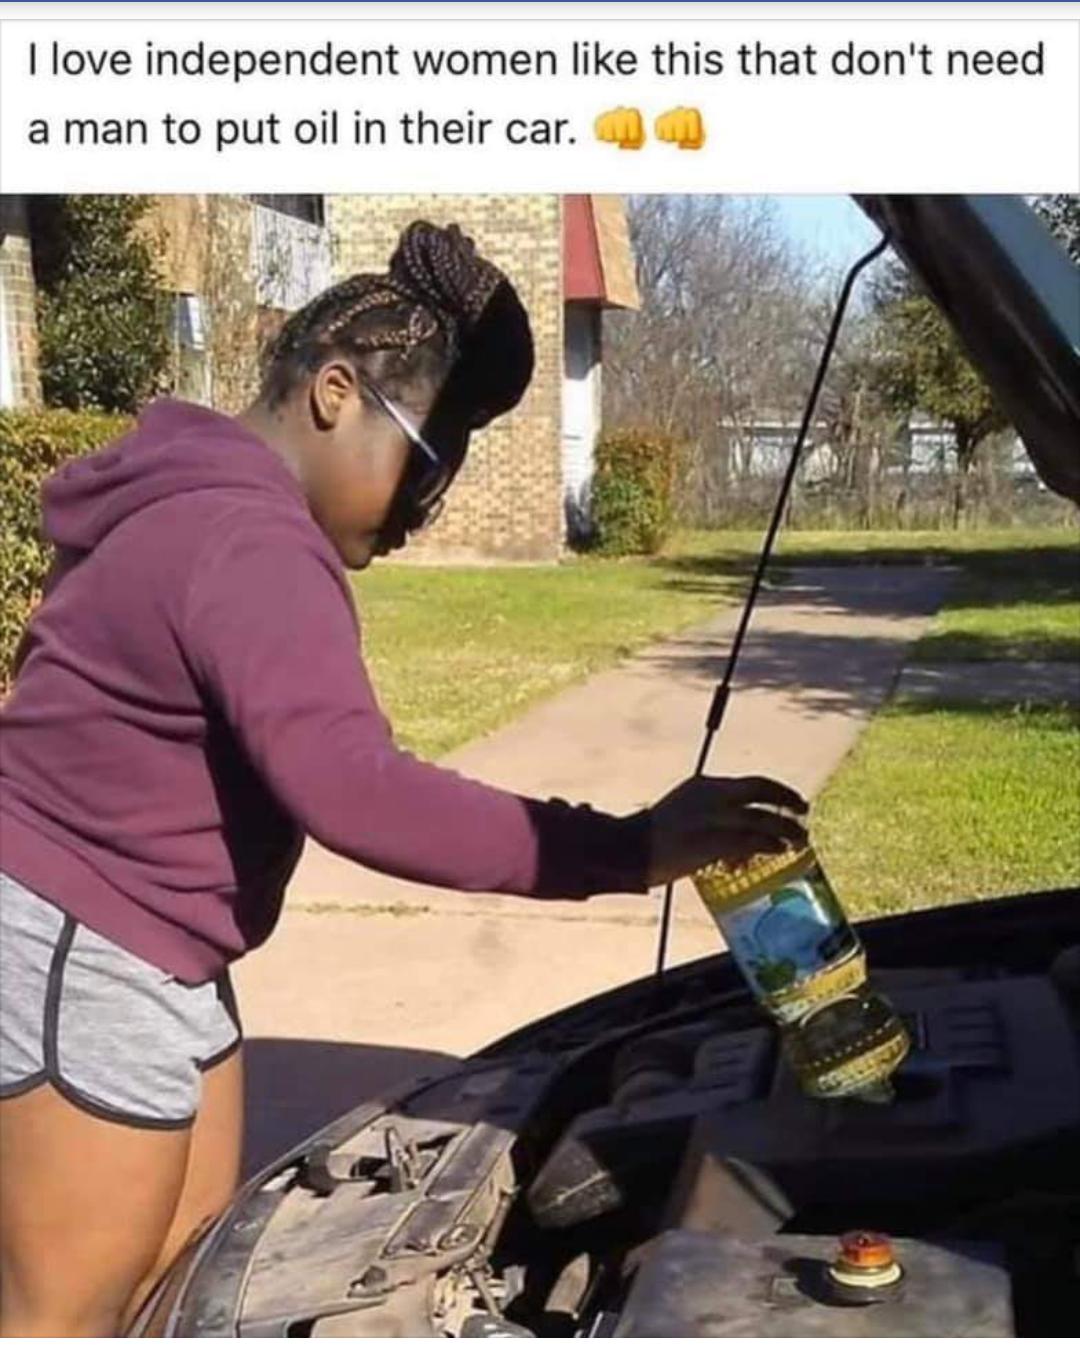 Cooking oil - I love independent women this that don't need a man to put oil in their car.